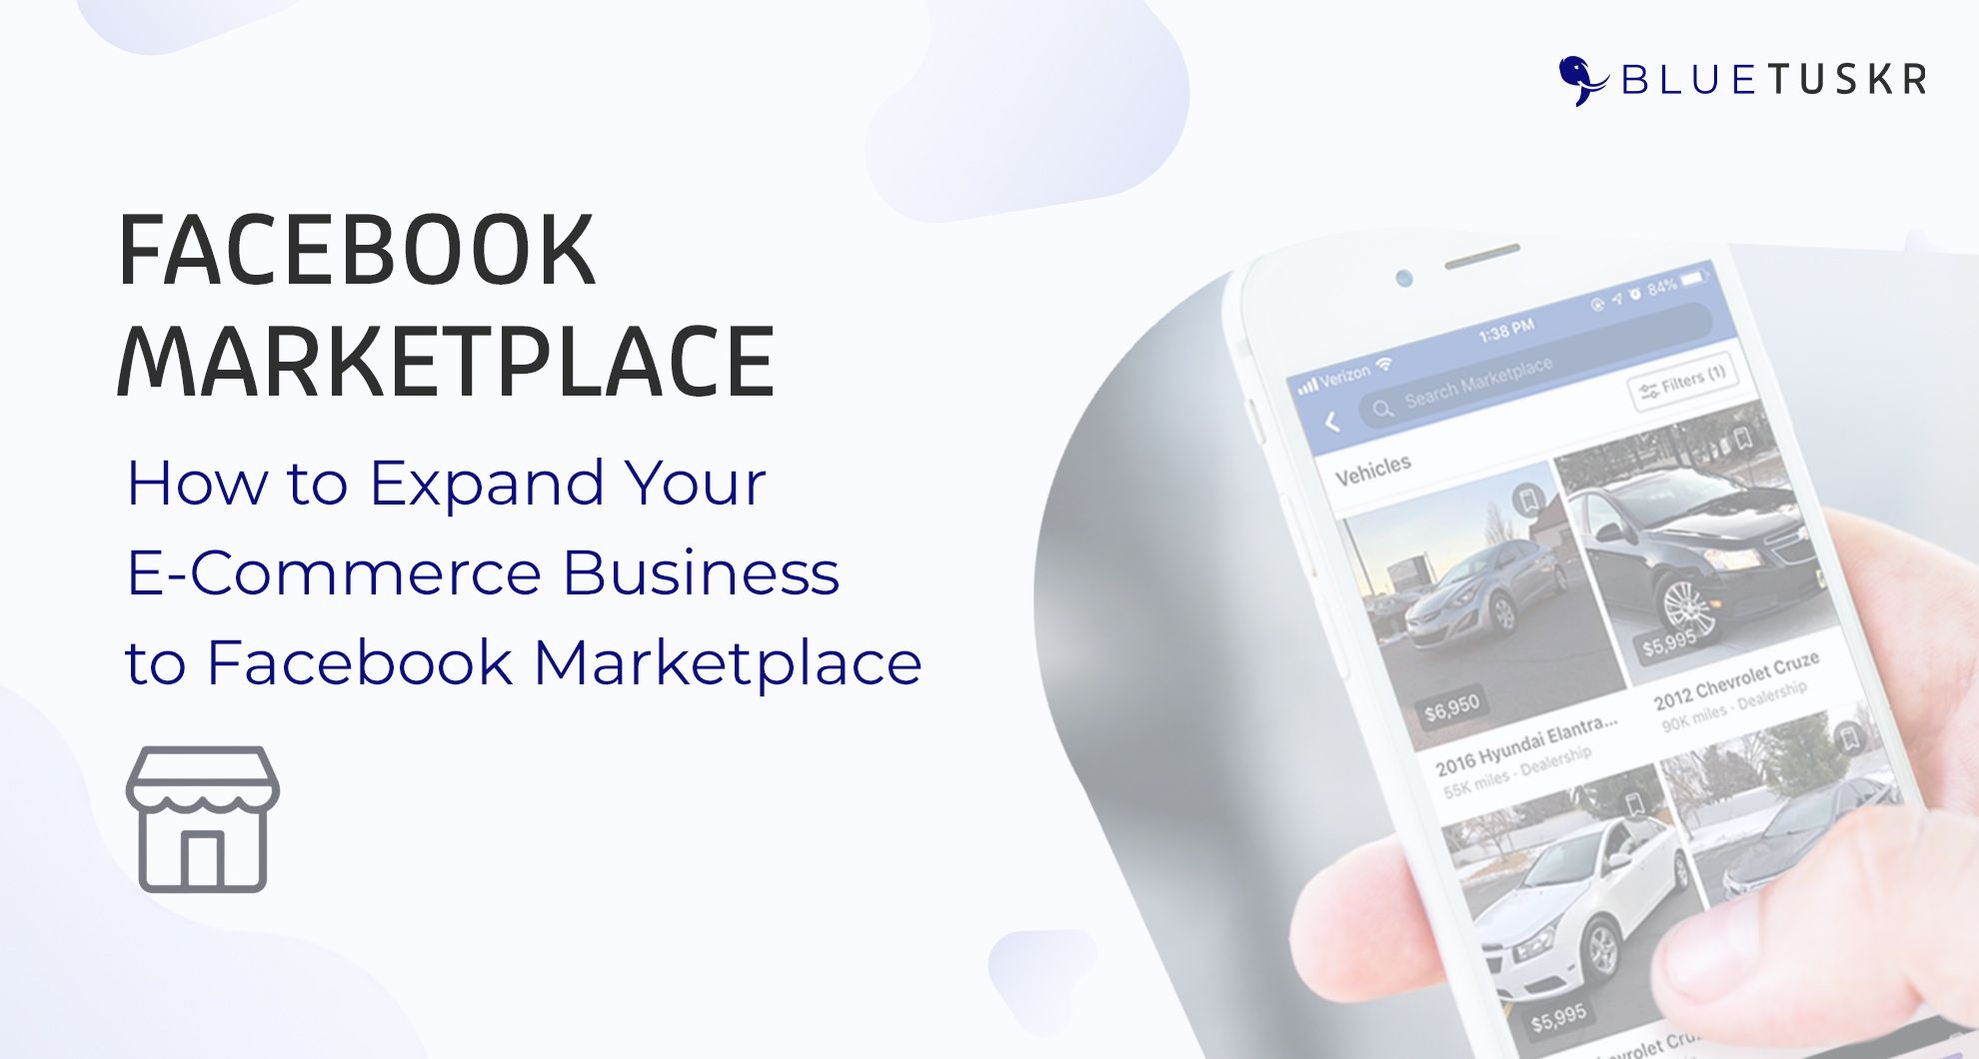 How to Expand Your E-Commerce Business to Facebook Marketplace